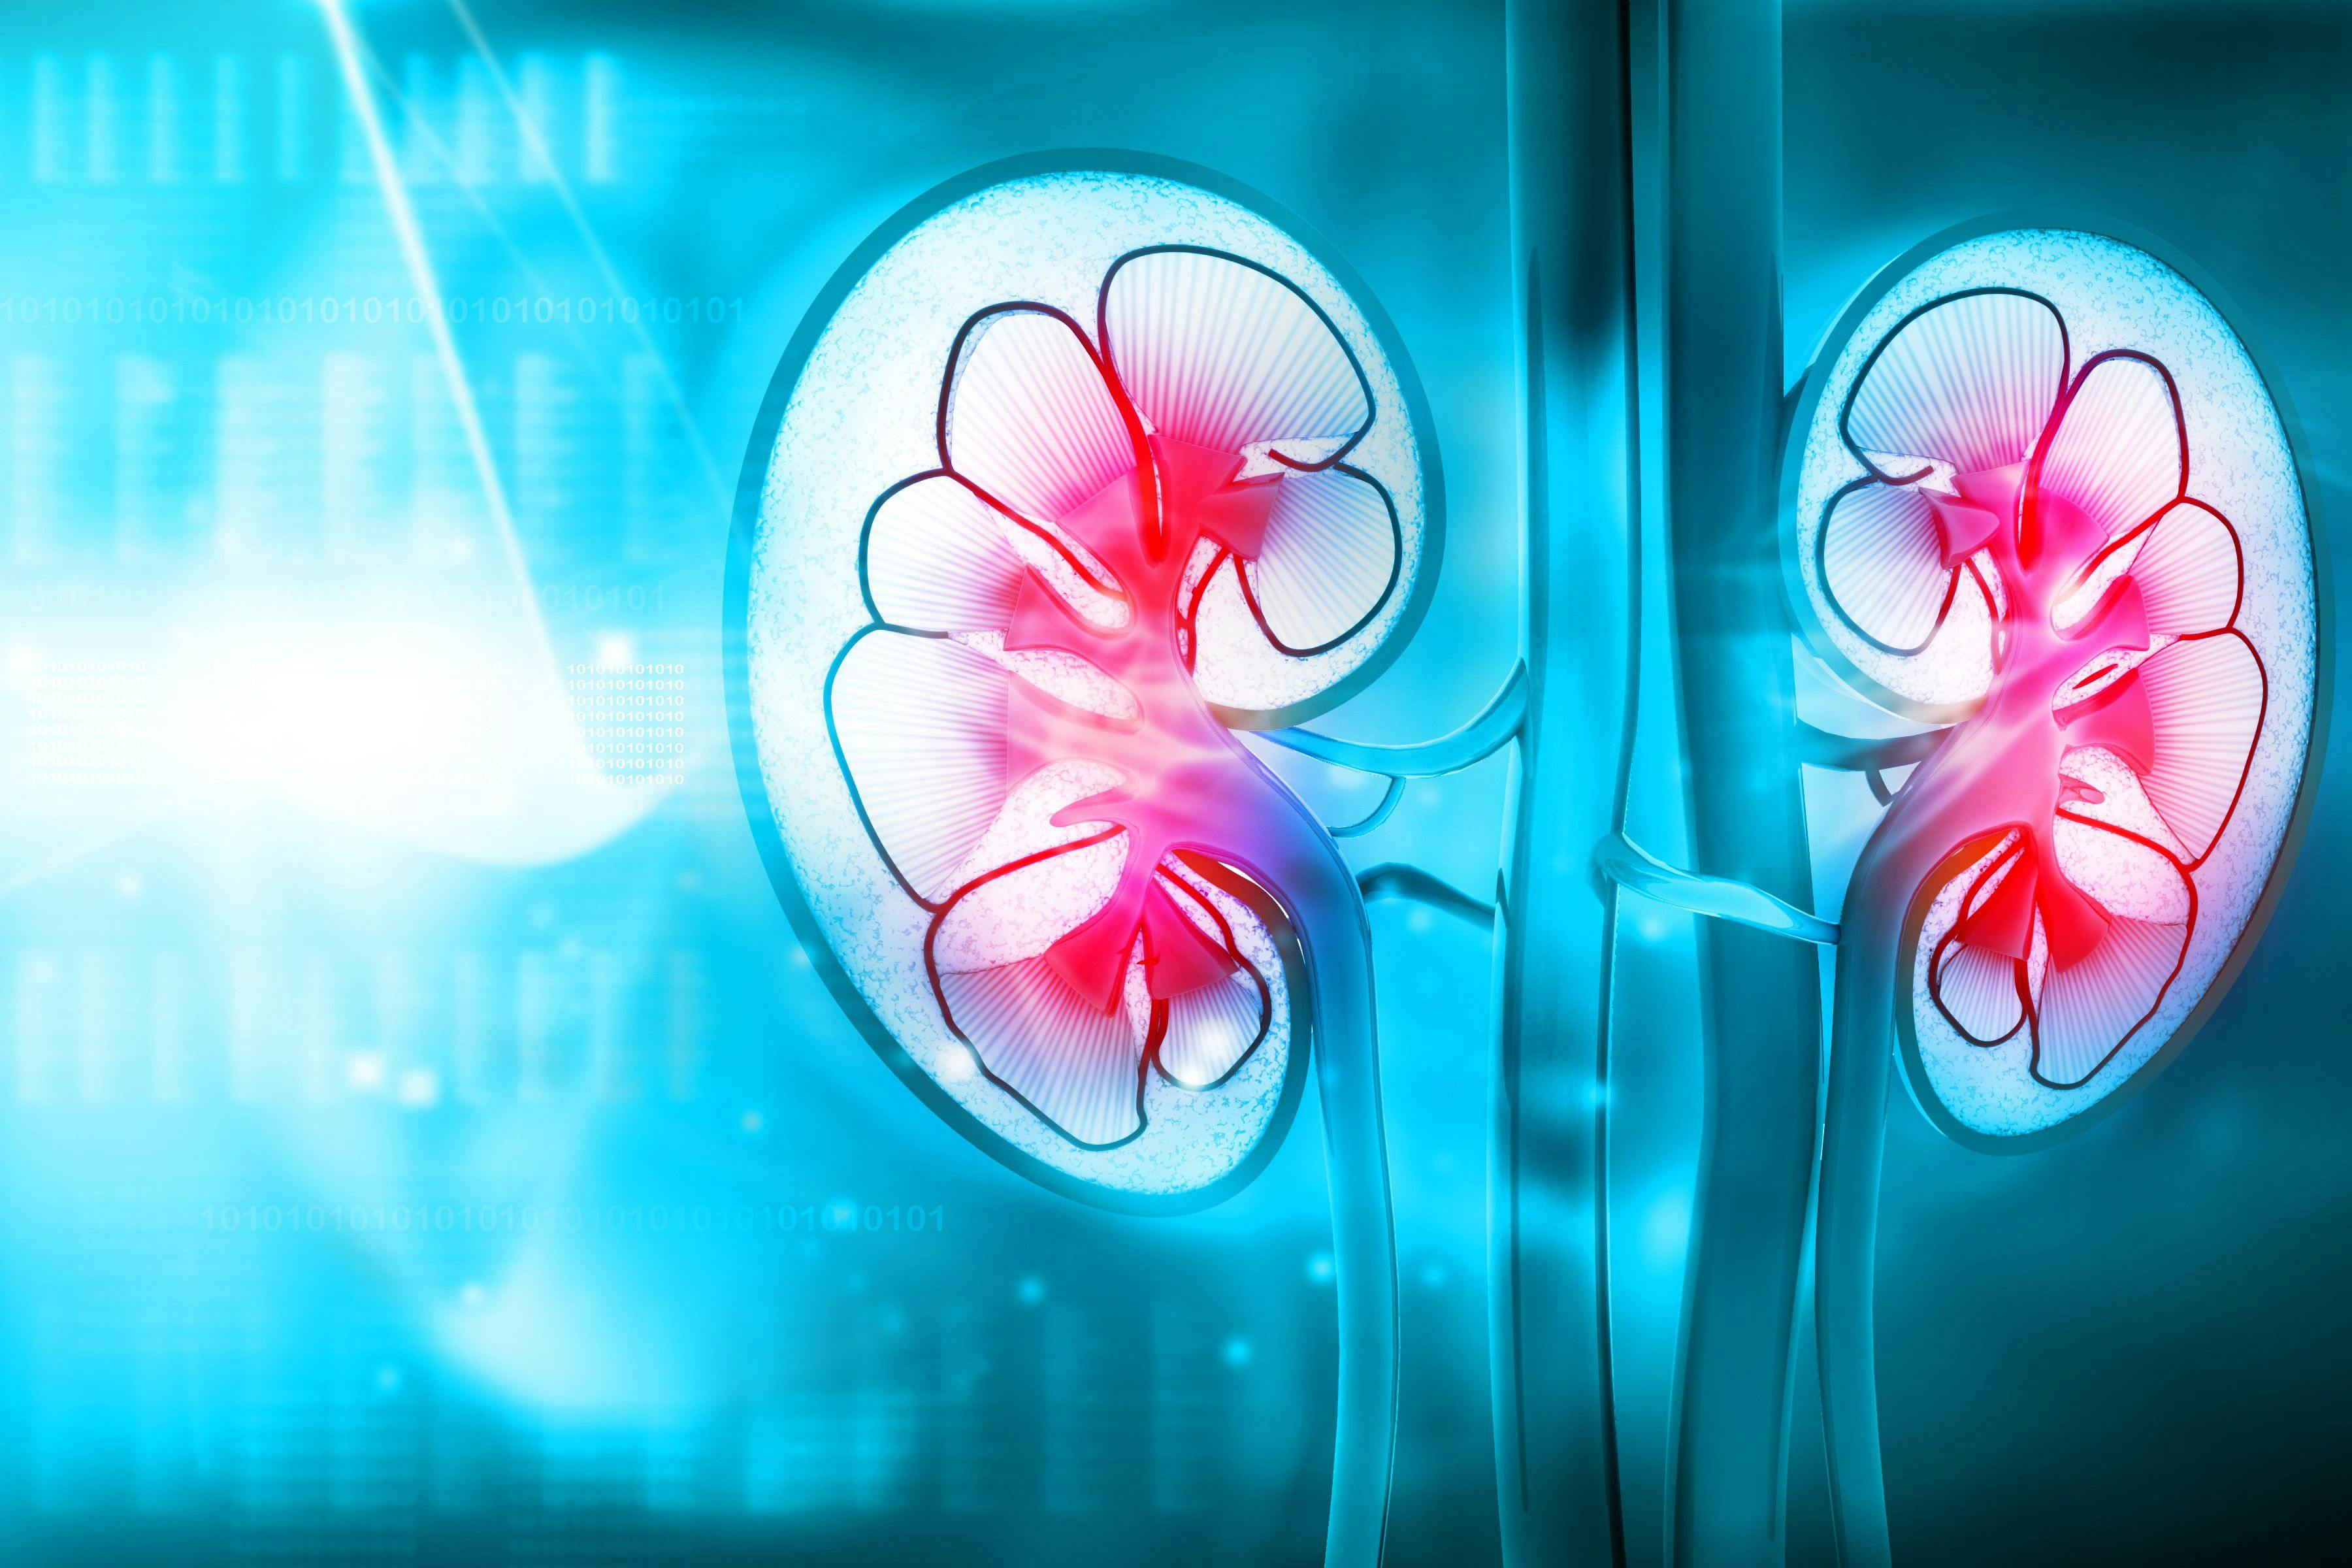 Keytruda-Inlyta Combo Continues to Improve Survival in Kidney Cancer